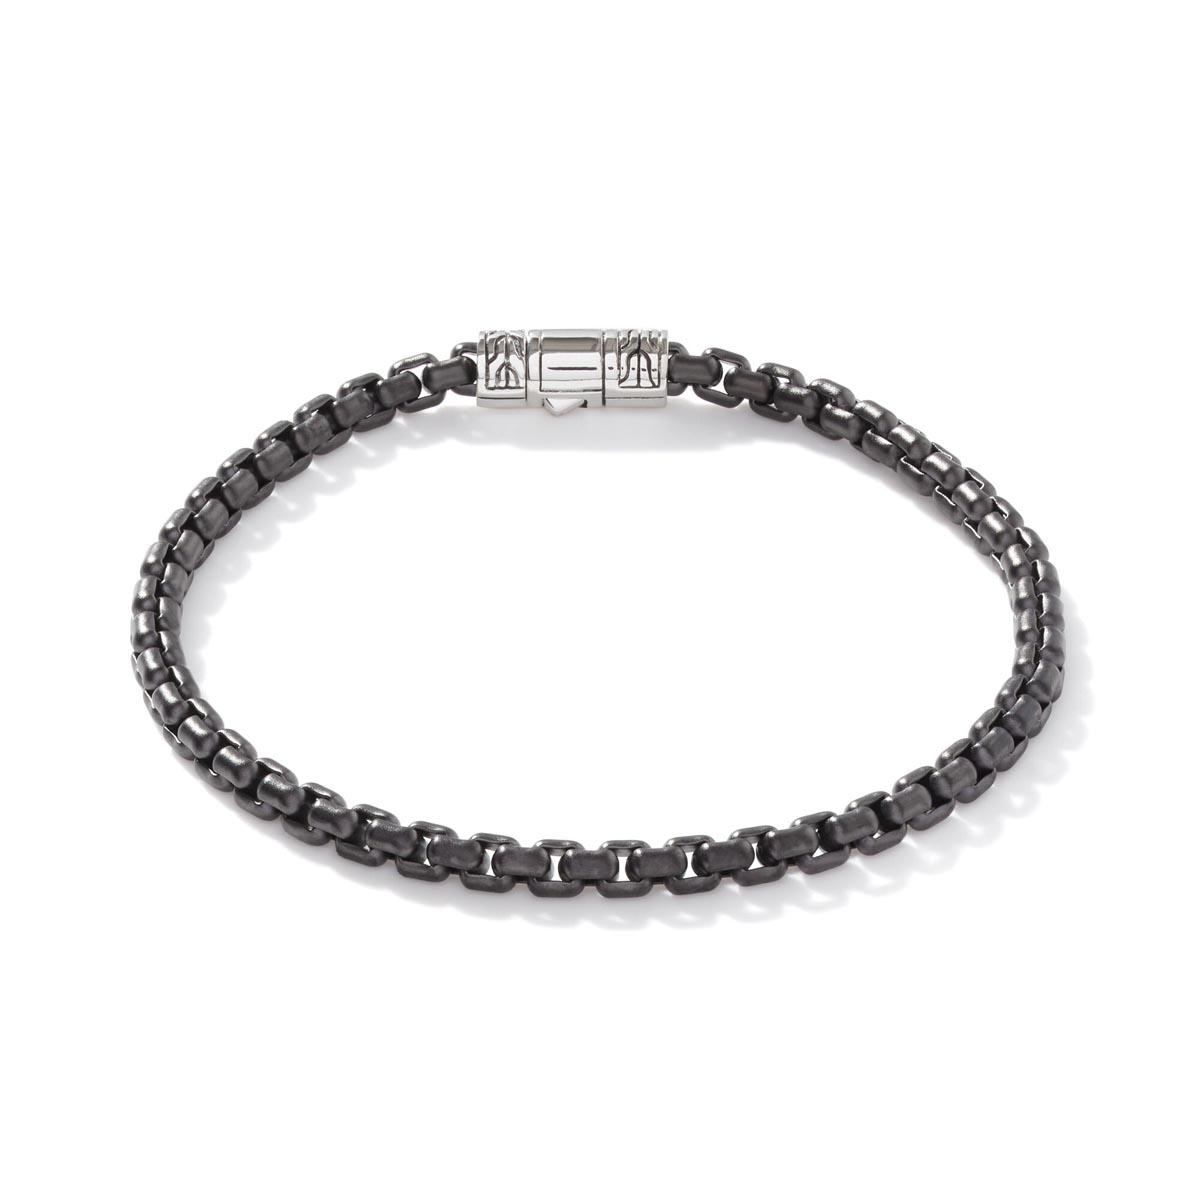 John Hardy Classic Chain Collection Box Chain Bracelet in Sterling Silver with Matte Black Rhodium